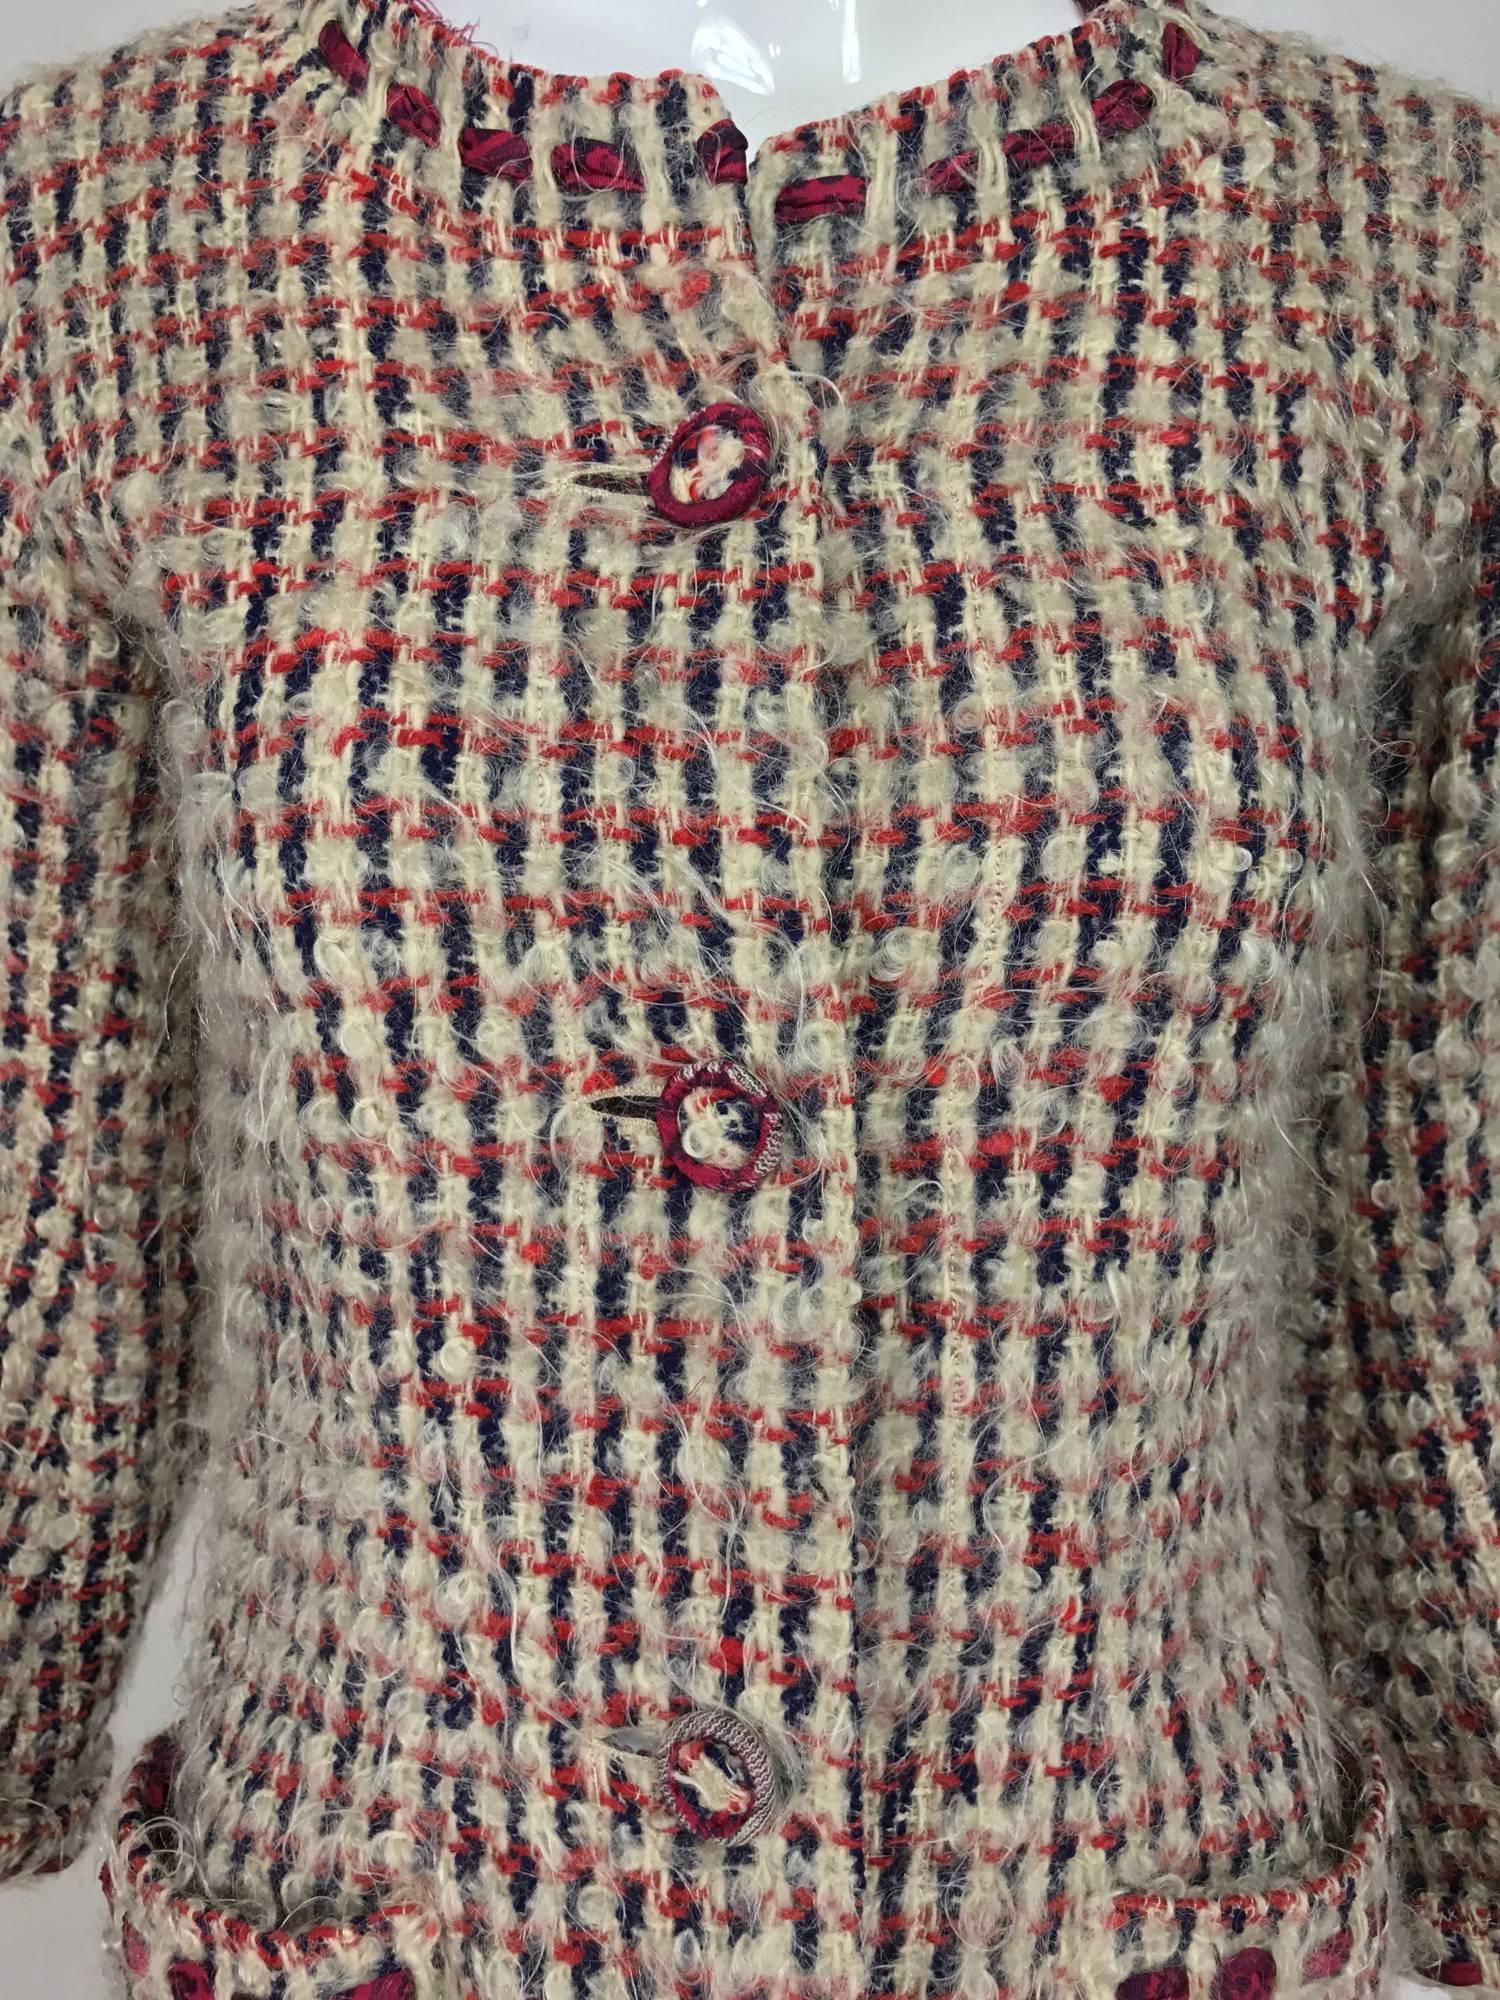 Chanel Haute Couture mohair wool coat from the early 1960s. Woven red, cream and blue check mohair and wool blend coat has silk ribbon run trims at the collar, cuffs and pocket edges, the silk ribbon matches the lining of the coat, which coordinates